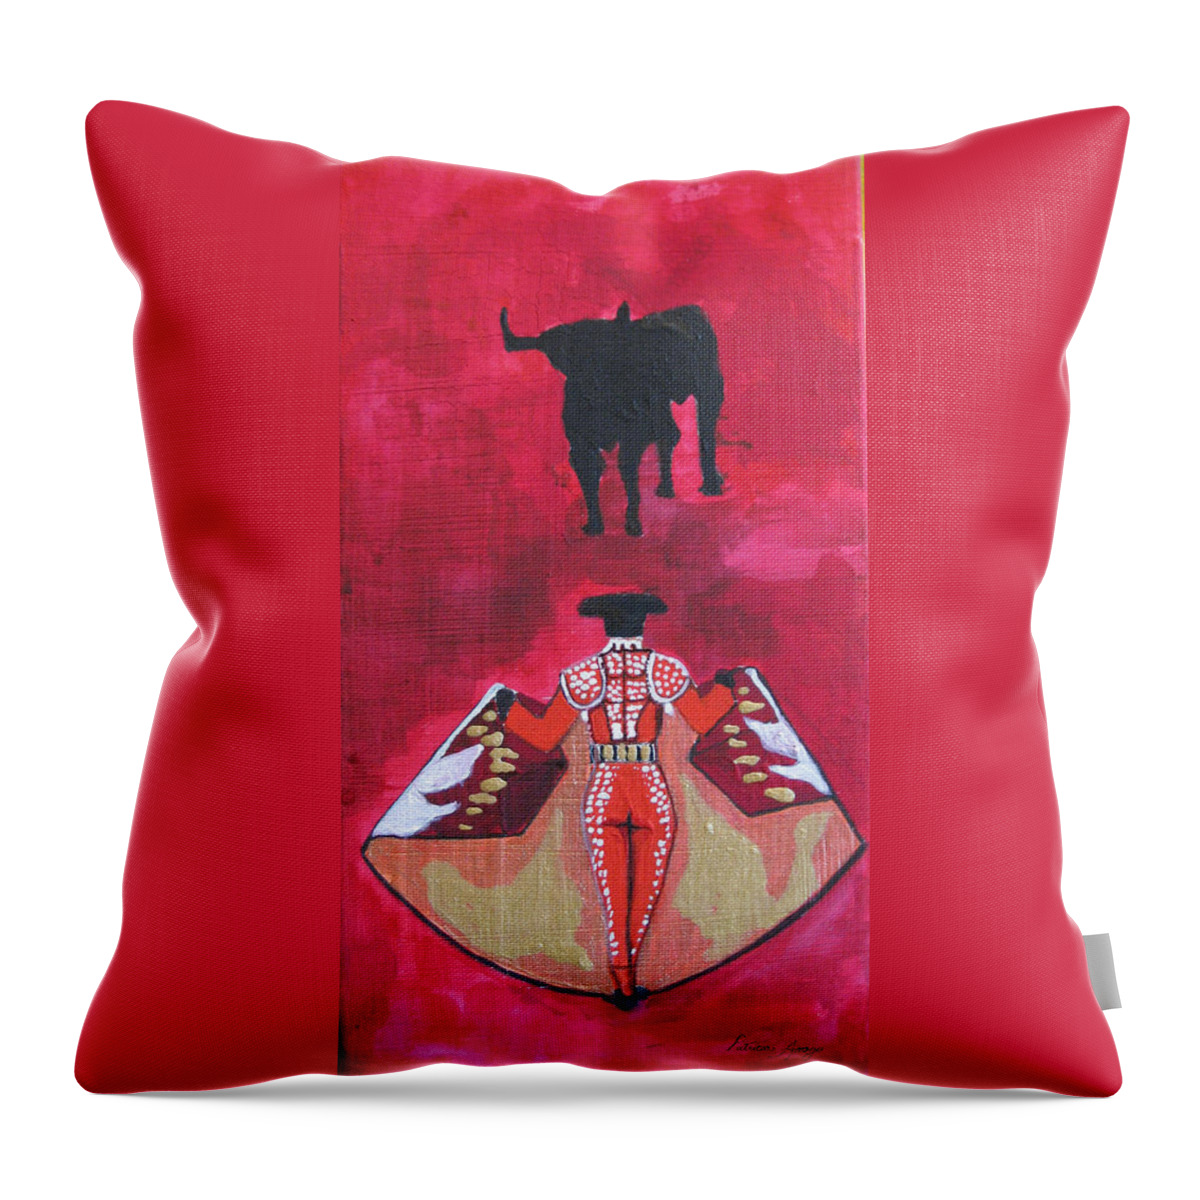 Spanish Art Throw Pillow featuring the painting The Bull Fight NO.1 by Patricia Arroyo